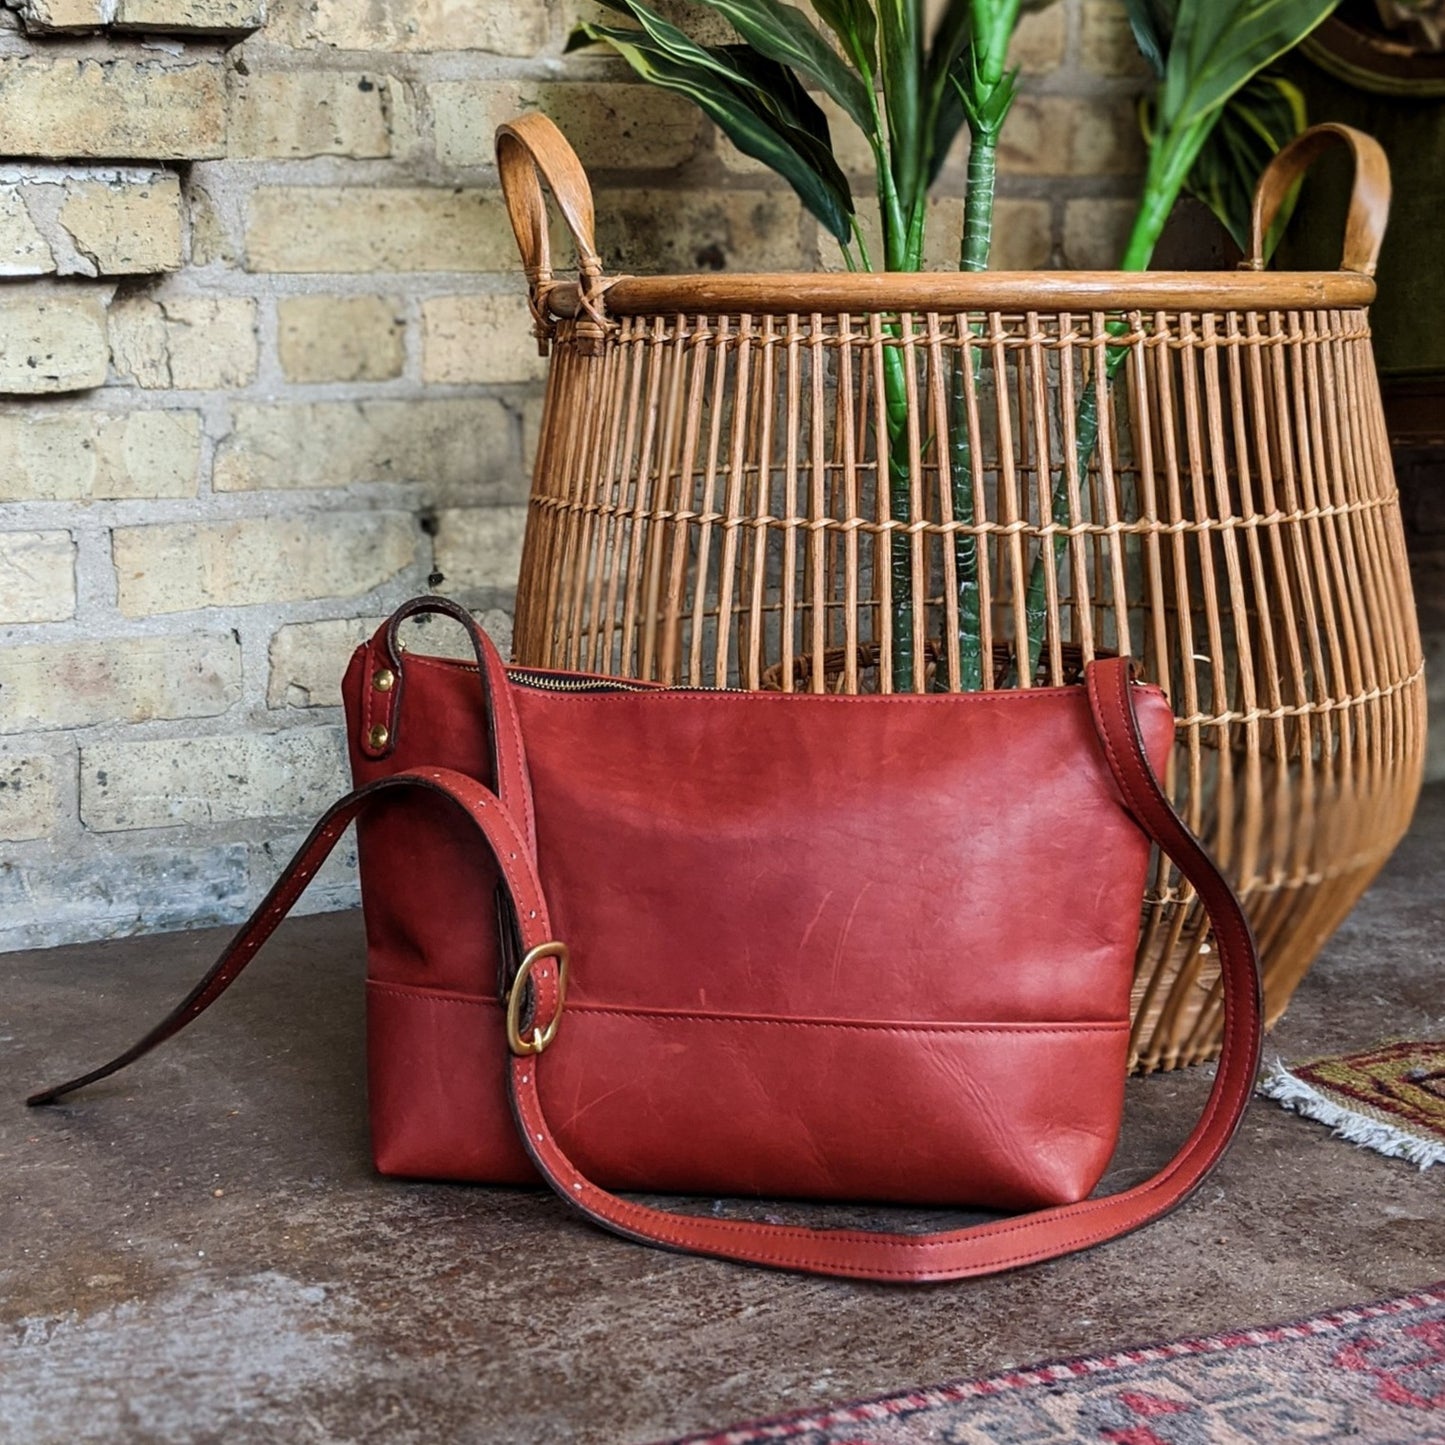 Directive | Crossbody Bag | Available in Multiple Colors